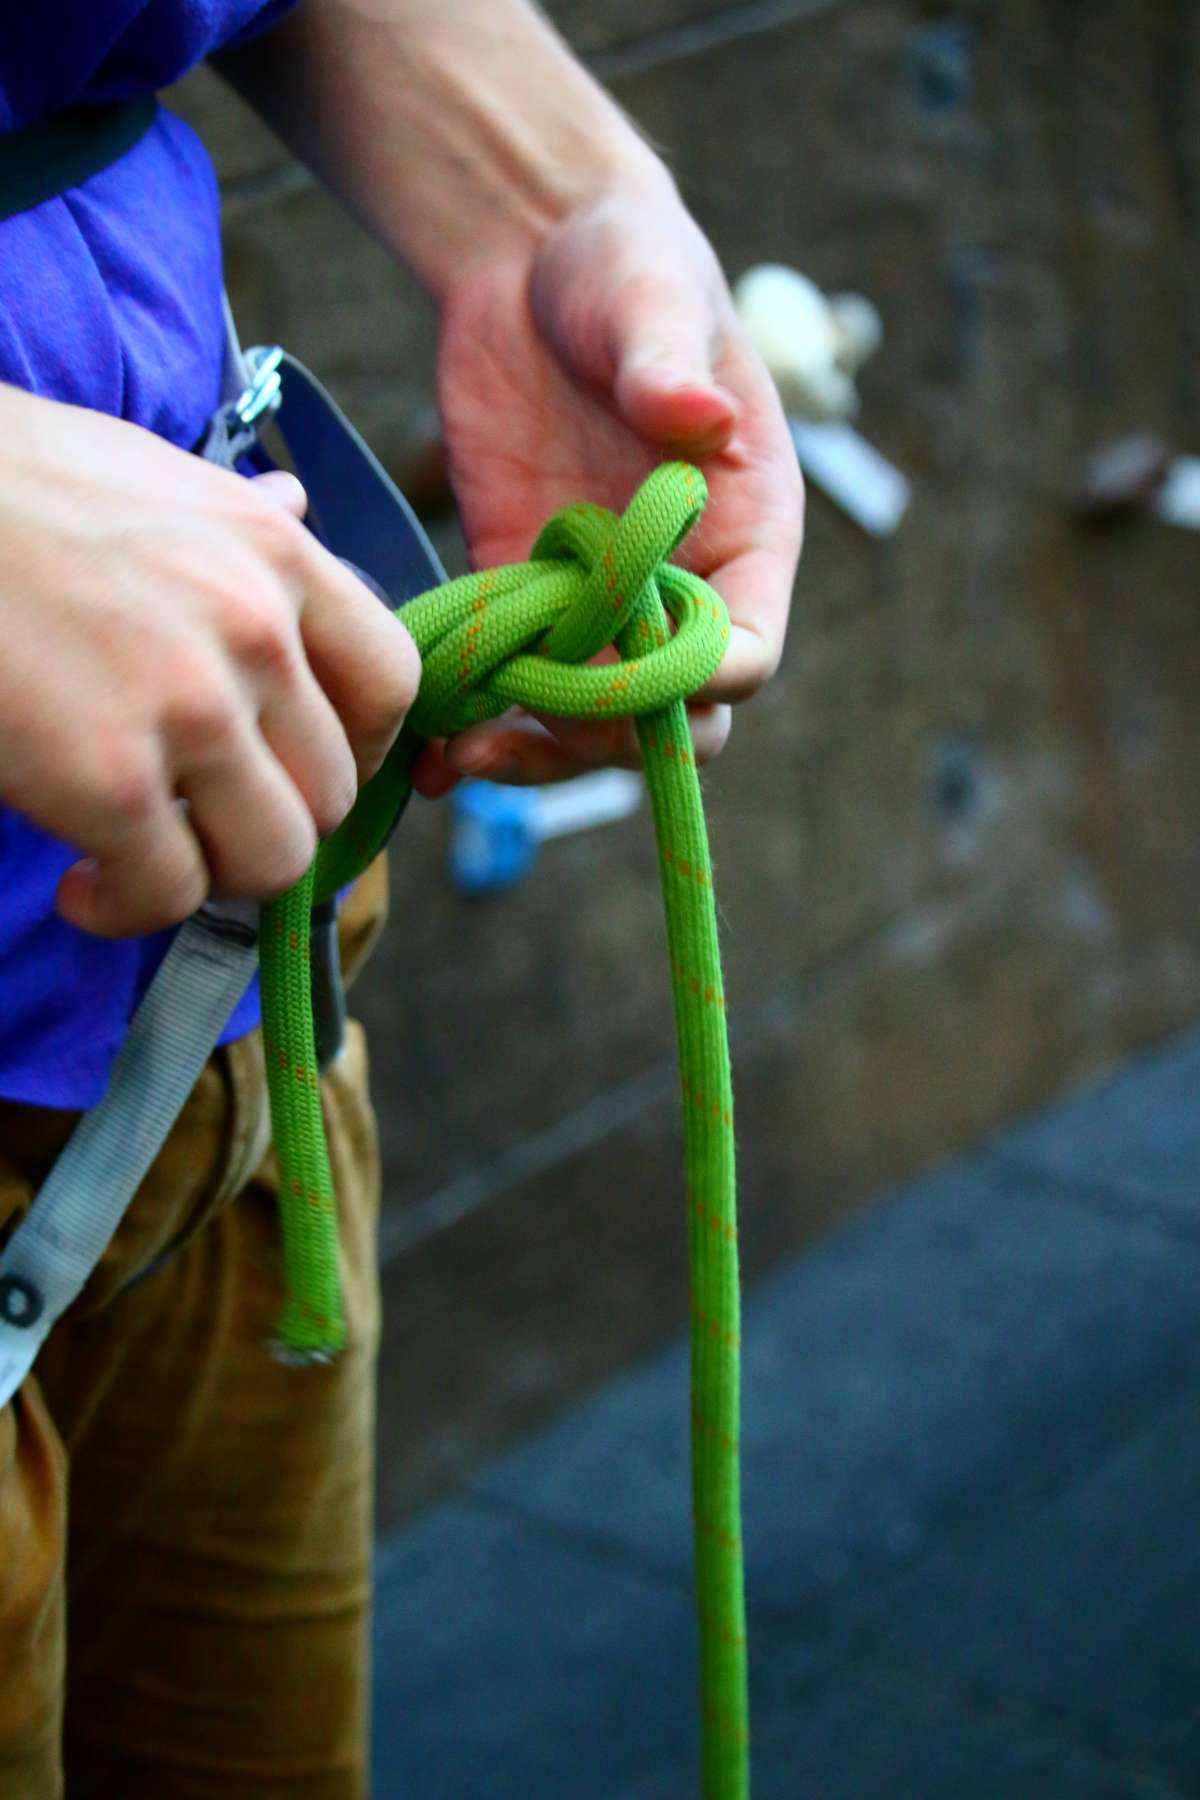 Detail image of rope for the climbing wall